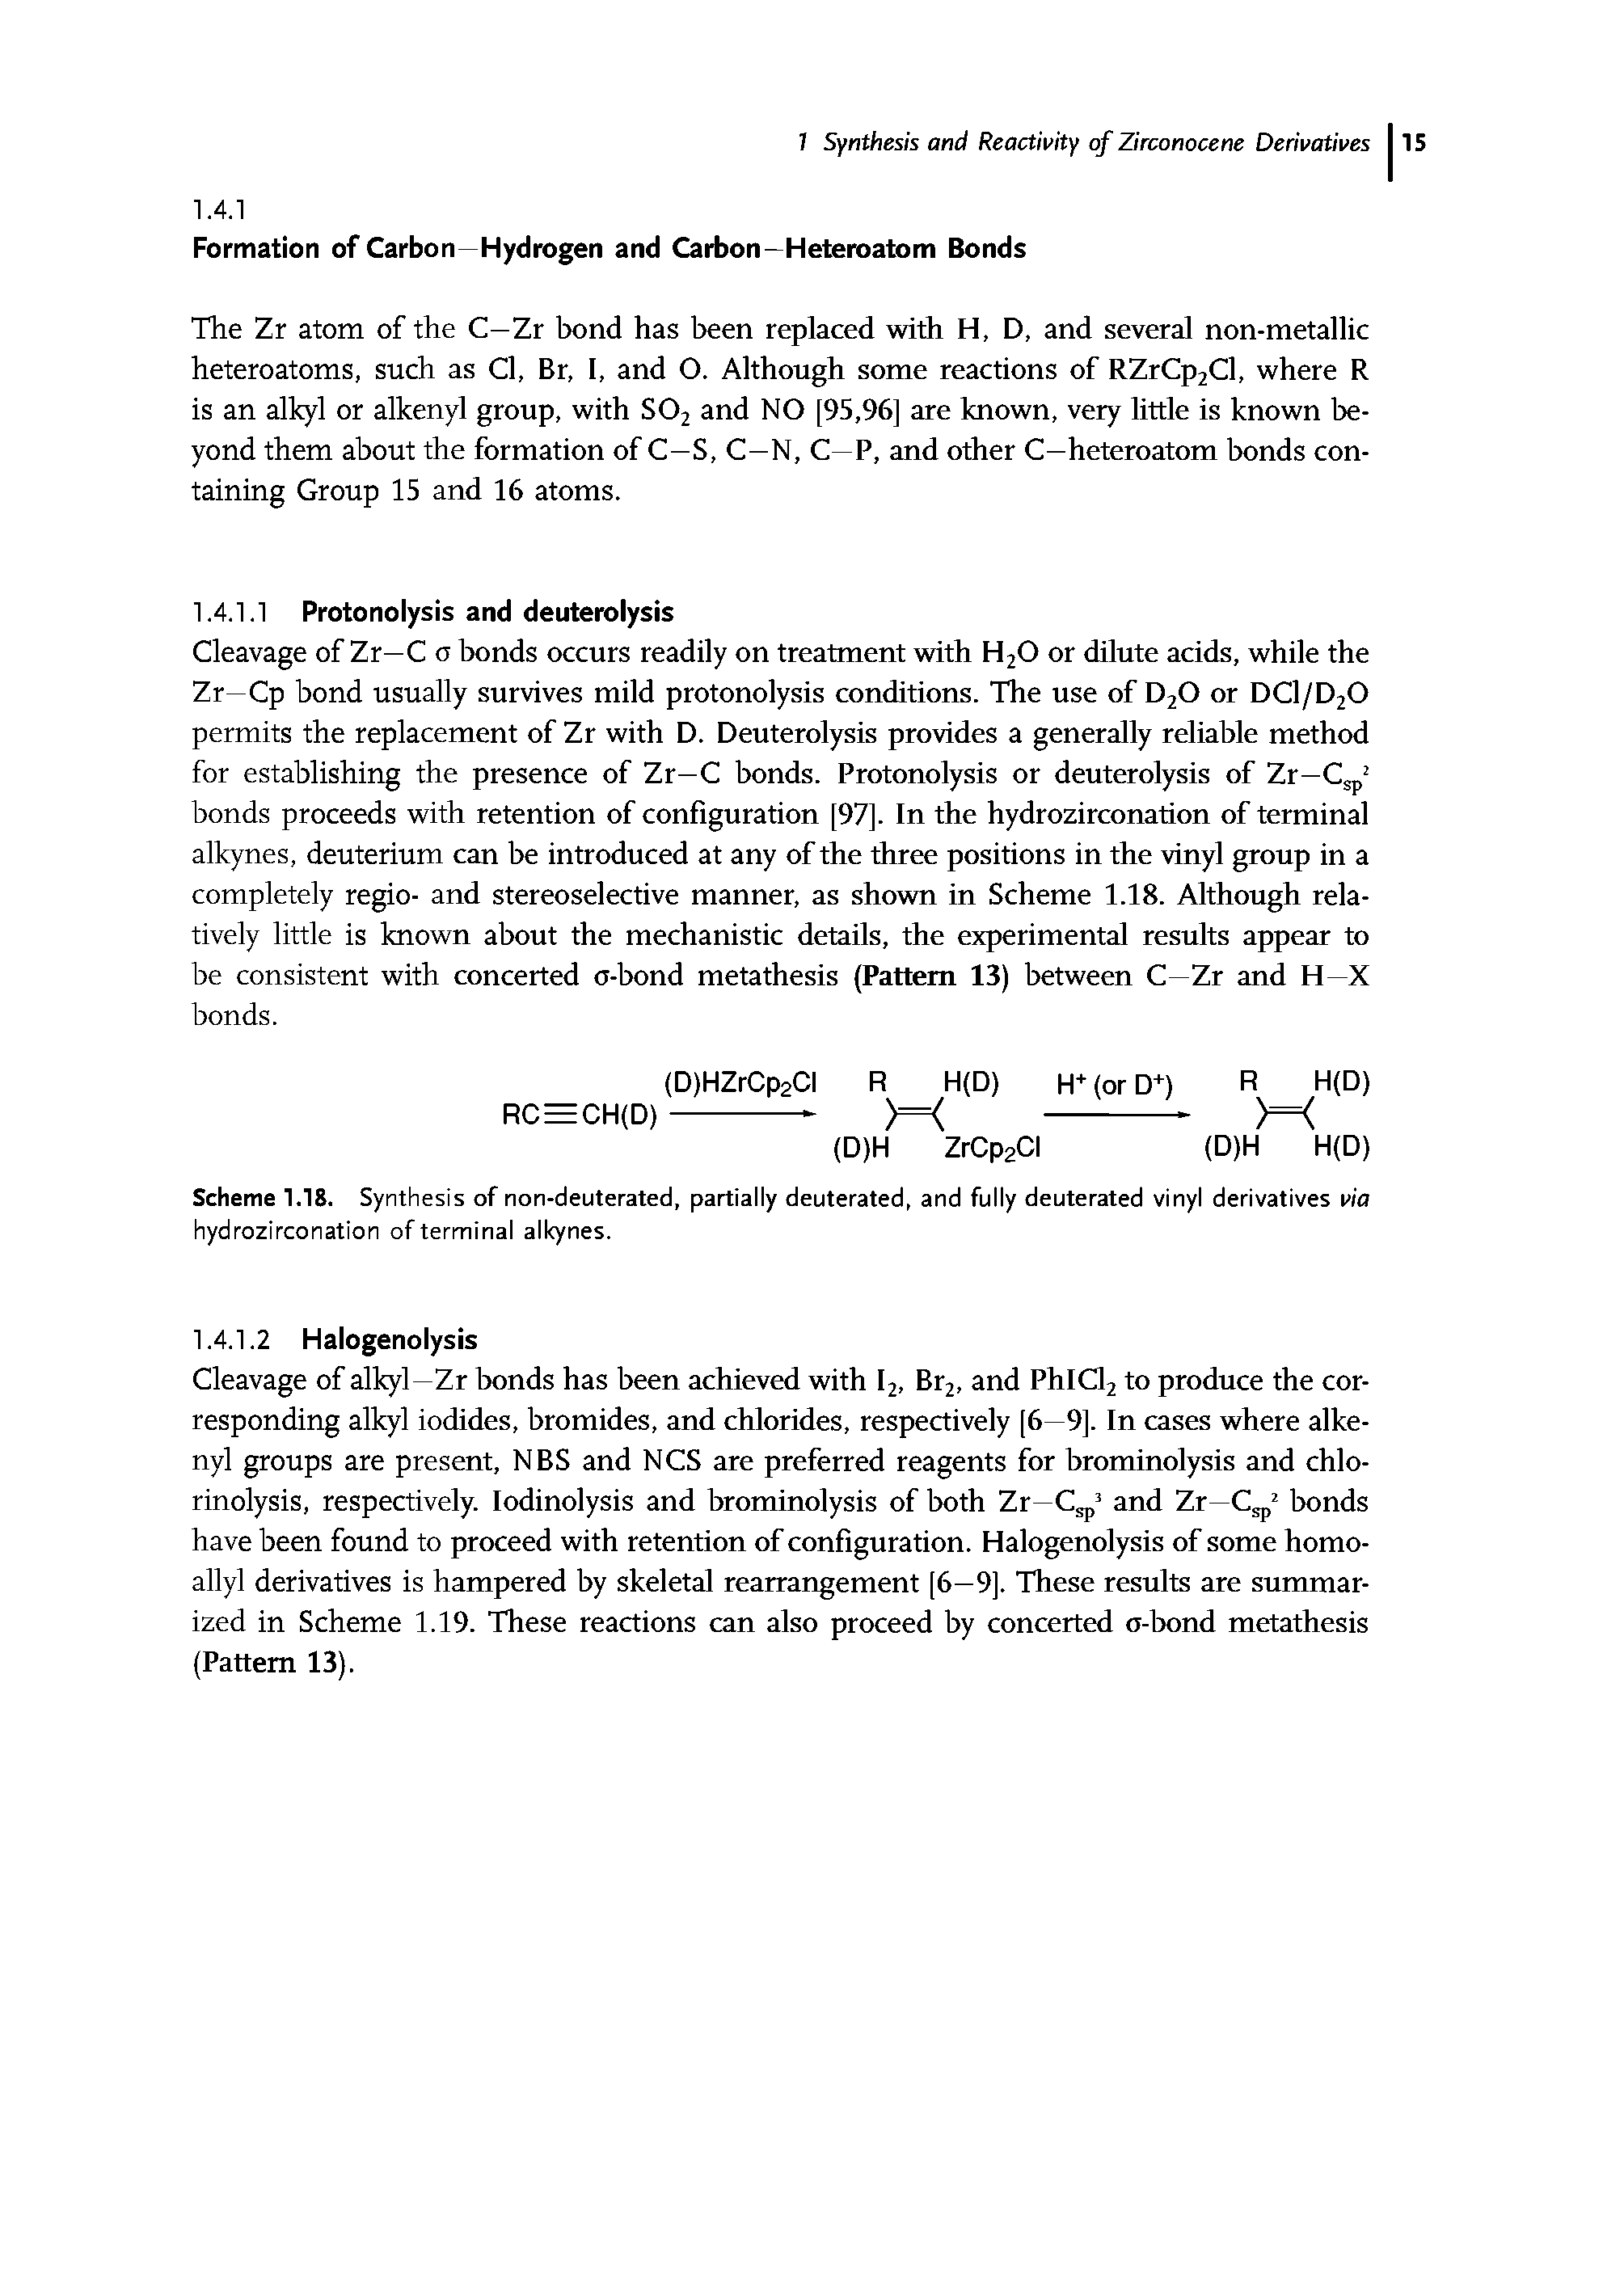 Scheme 1.18. Synthesis of non-deuterated, partially deuterated, and fully deuterated vinyl derivatives via hydrozirconation of terminal alkynes.